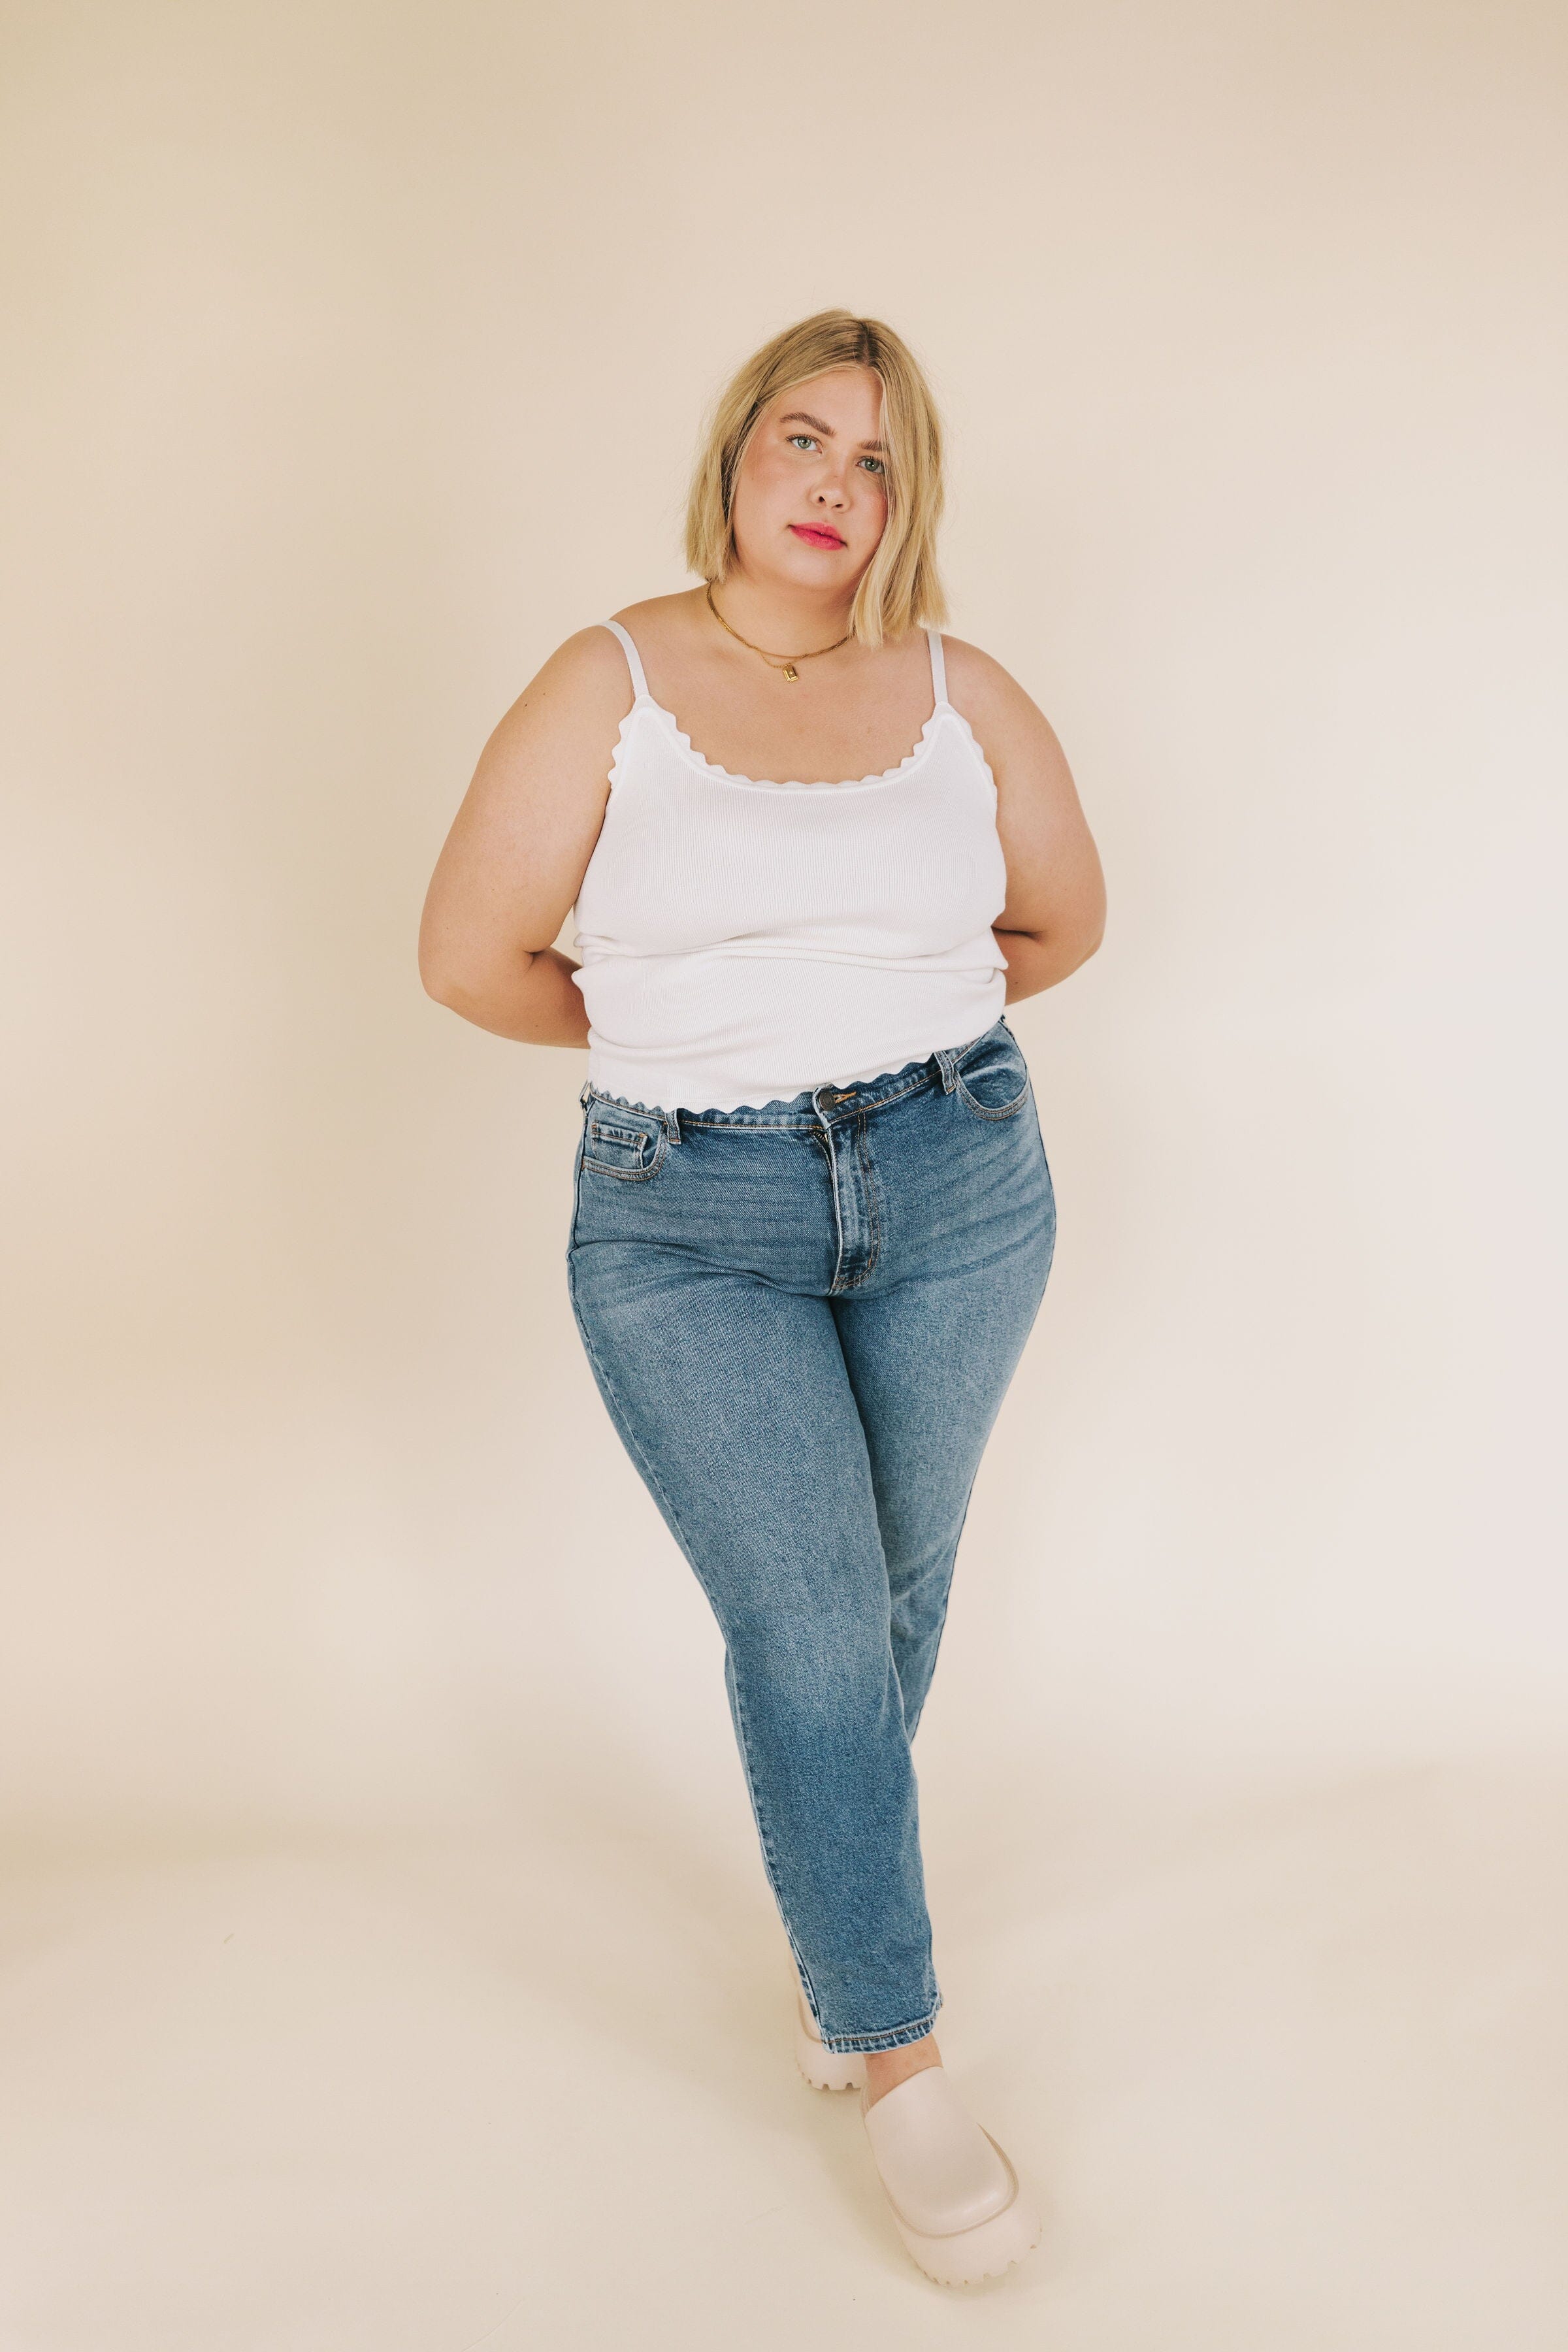 PLUS SIZE - Simply Chic Tank Top